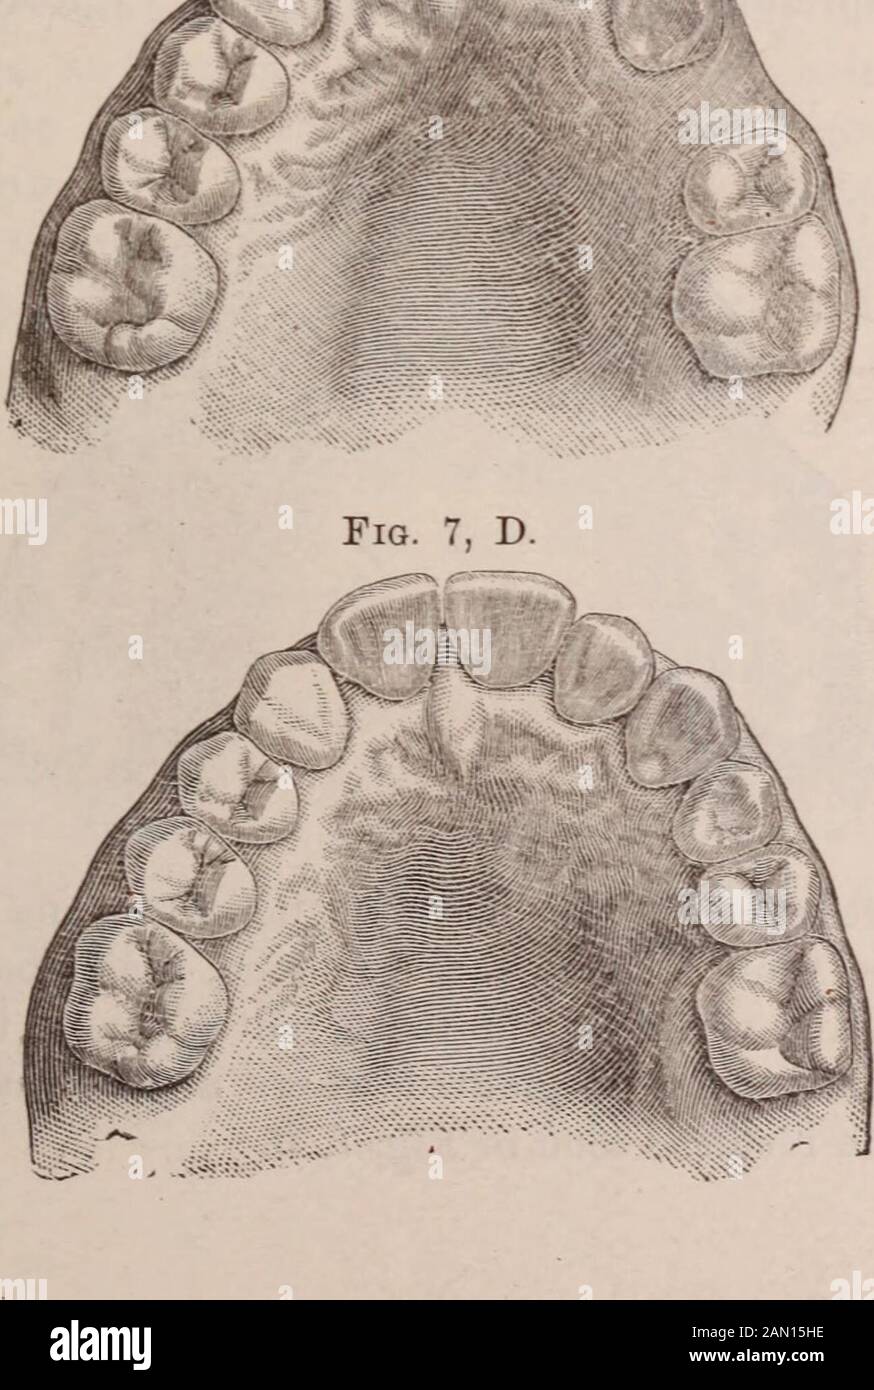 Dental cosmos . Fig. 7, C.. 30 THE DENTAL COSMOS. were missing, the cuspids had come forward, and the bite was soclose that regulation was impracticable, and at best would have neces-sitated a plate for the laterals. The cuspids were removed, theirsockets brought forward, and selected laterals implanted. The cus-pids were afterward placed in new sockets, and the result is as Fig. 8, E. Stock Photo